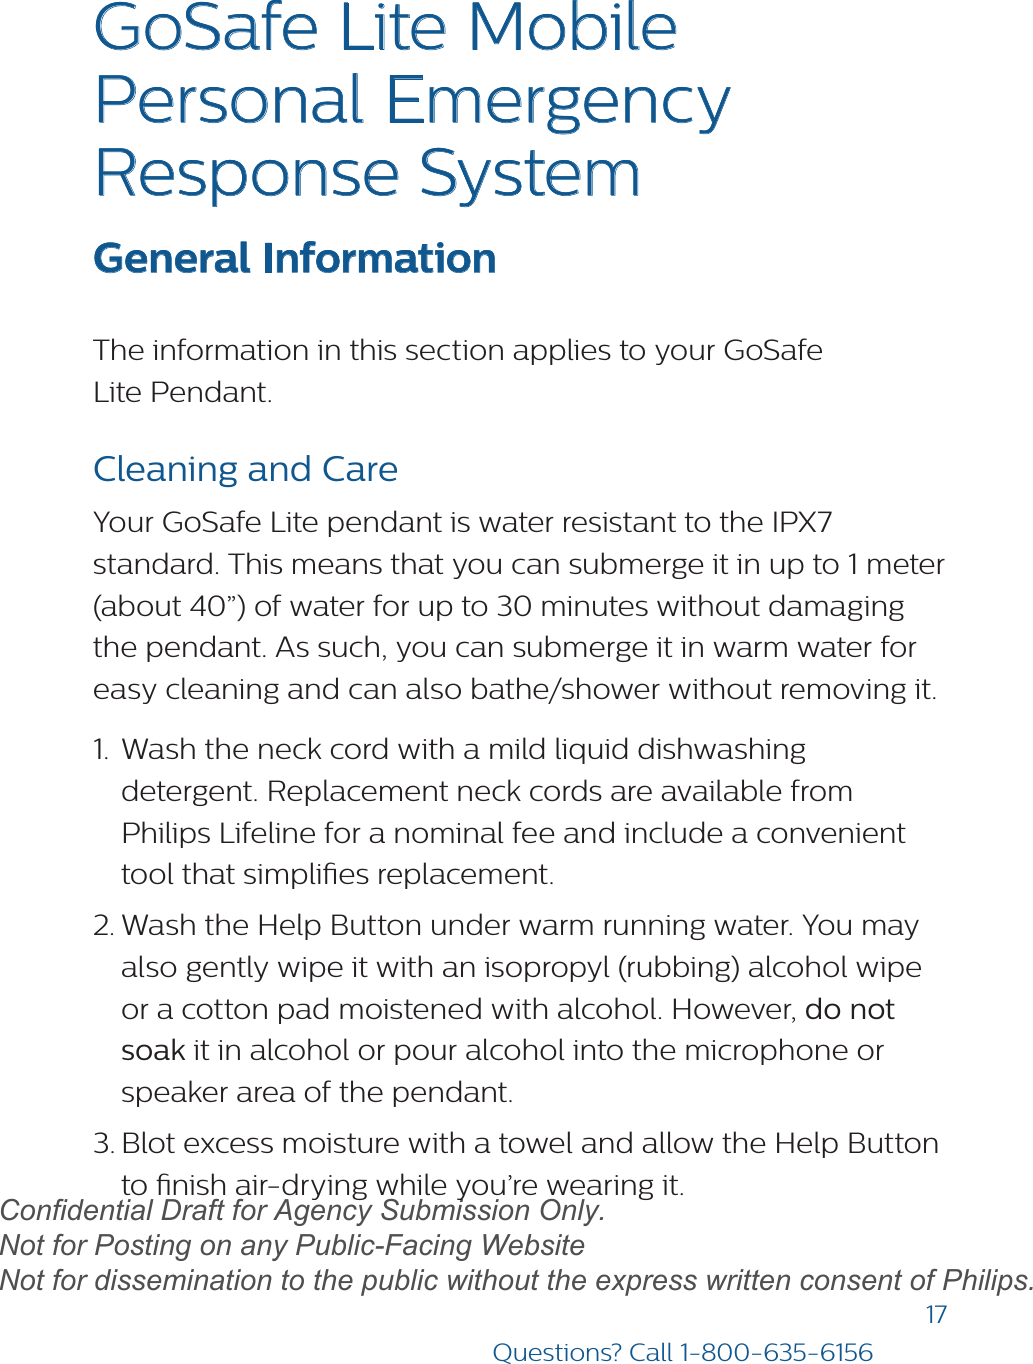 17Questions? Call 1-800-635-6156GoSafe Lite Mobile Personal Emergency Response System  General InformationThe information in this section applies to your GoSafe Lite Pendant. Cleaning and CareYour GoSafe Lite pendant is water resistant to the IPX7 standard. This means that you can submerge it in up to 1 meter (about 40”) of water for up to 30 minutes without damaging the pendant. As such, you can submerge it in warm water for easy cleaning and can also bathe/shower without removing it. 1. Wash the neck cord with a mild liquid dishwashingdetergent. Replacement neck cords are available fromPhilips Lifeline for a nominal fee and include a convenienttool that simplies replacement.2. Wash the Help Button under warm running water. You mayalso gently wipe it with an isopropyl (rubbing) alcohol wipeor a cotton pad moistened with alcohol. However, do notsoak it in alcohol or pour alcohol into the microphone orspeaker area of the pendant.3. Blot excess moisture with a towel and allow the Help Buttonto nish air-drying while you’re wearing it.draftConfidential Draft for Agency Submission Only.   Not for Posting on any Public-Facing Website Not for dissemination to the public without the express written consent of Philips.